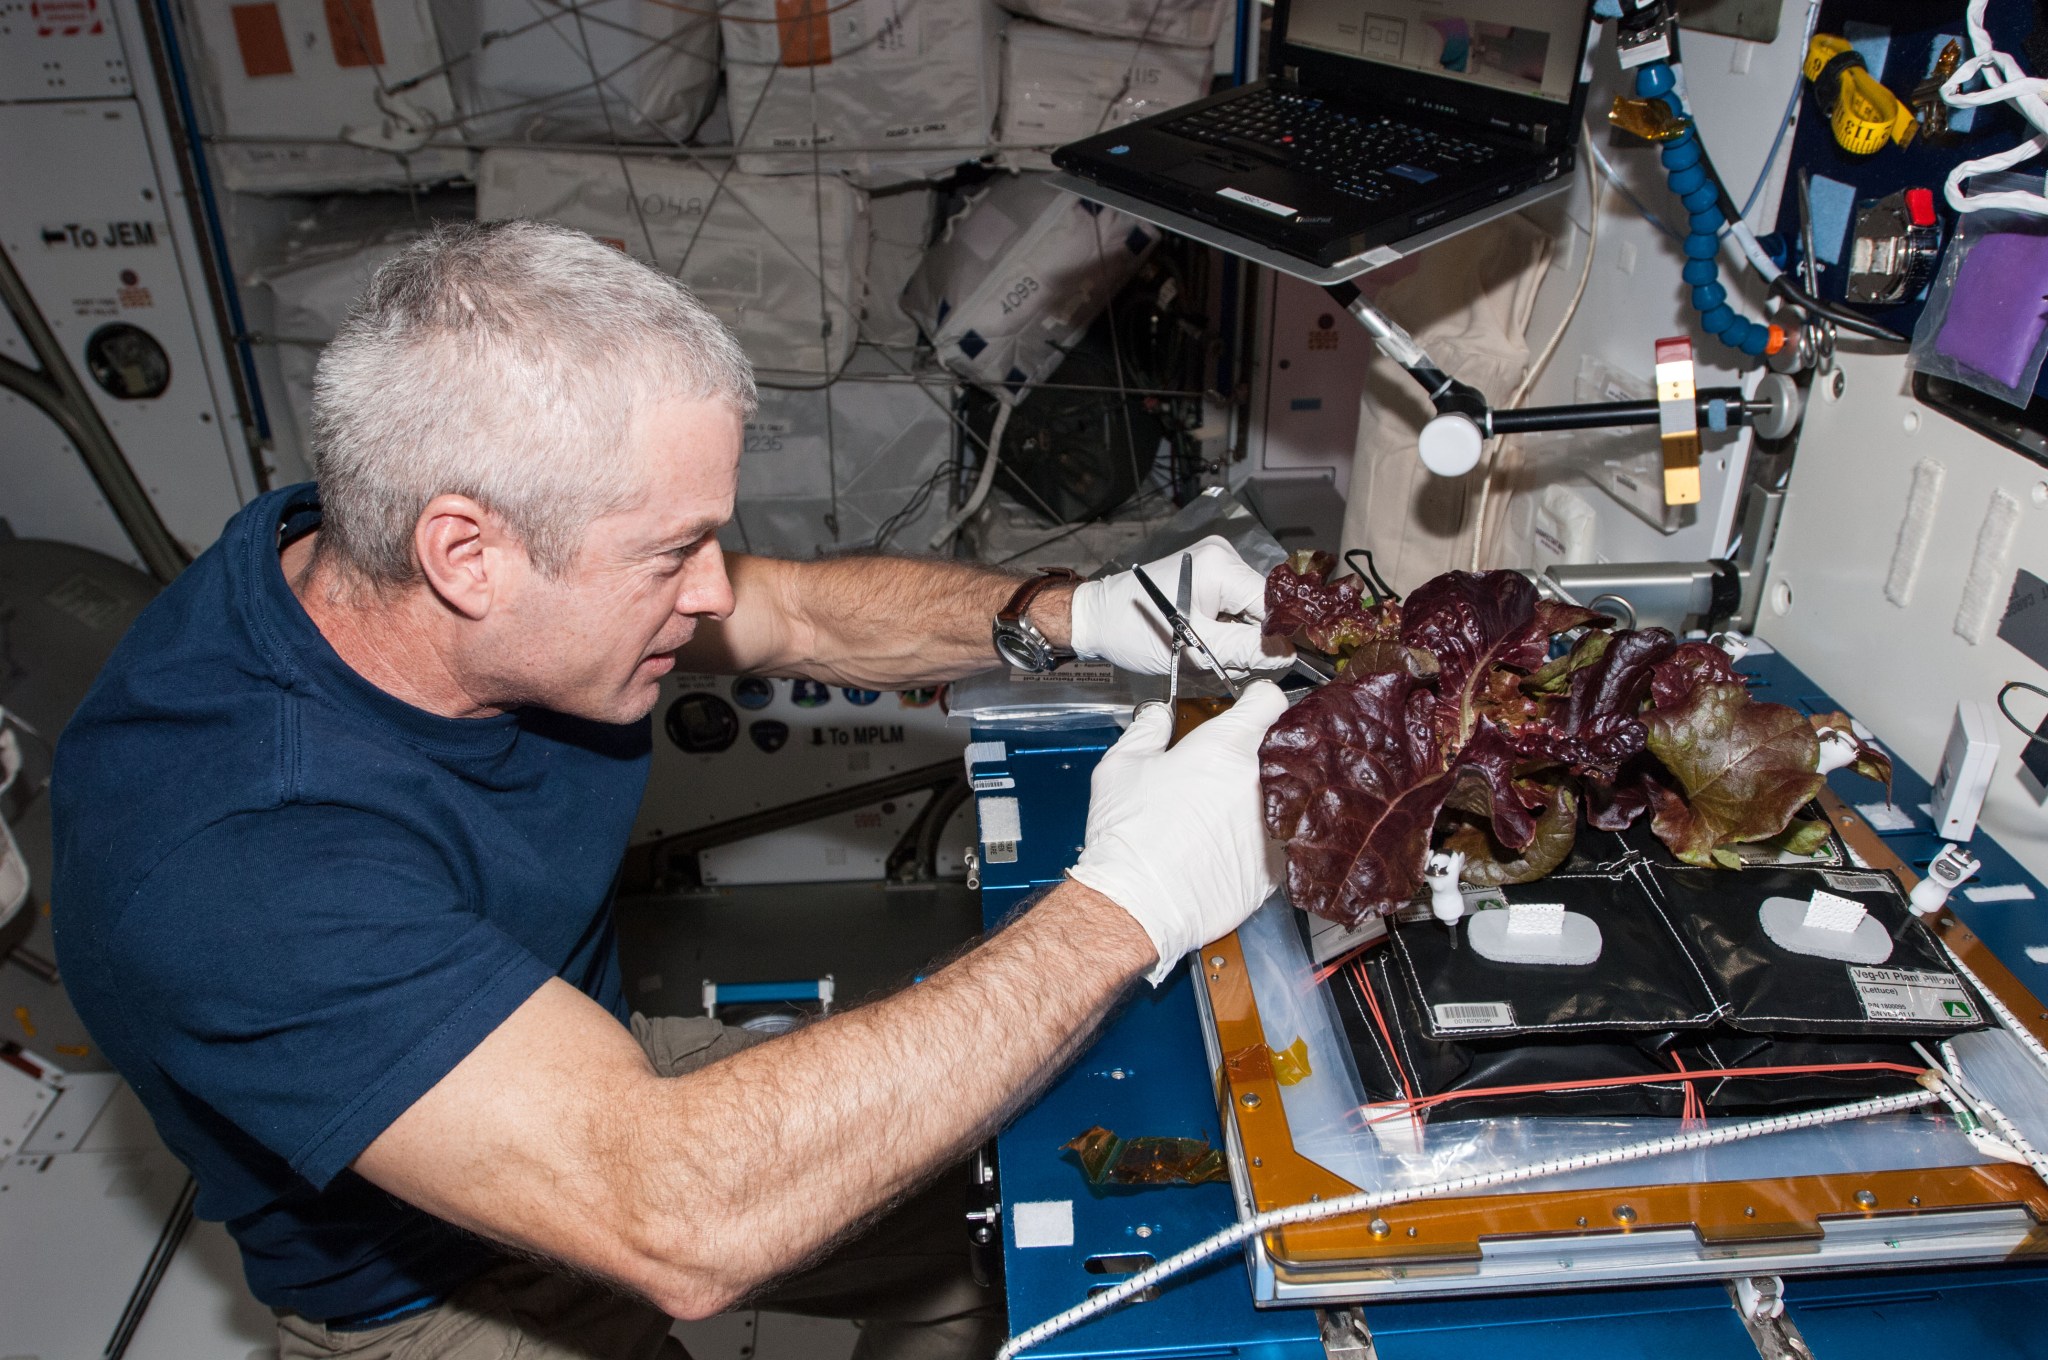 Red romaine lettuce plants aboard the ISS.